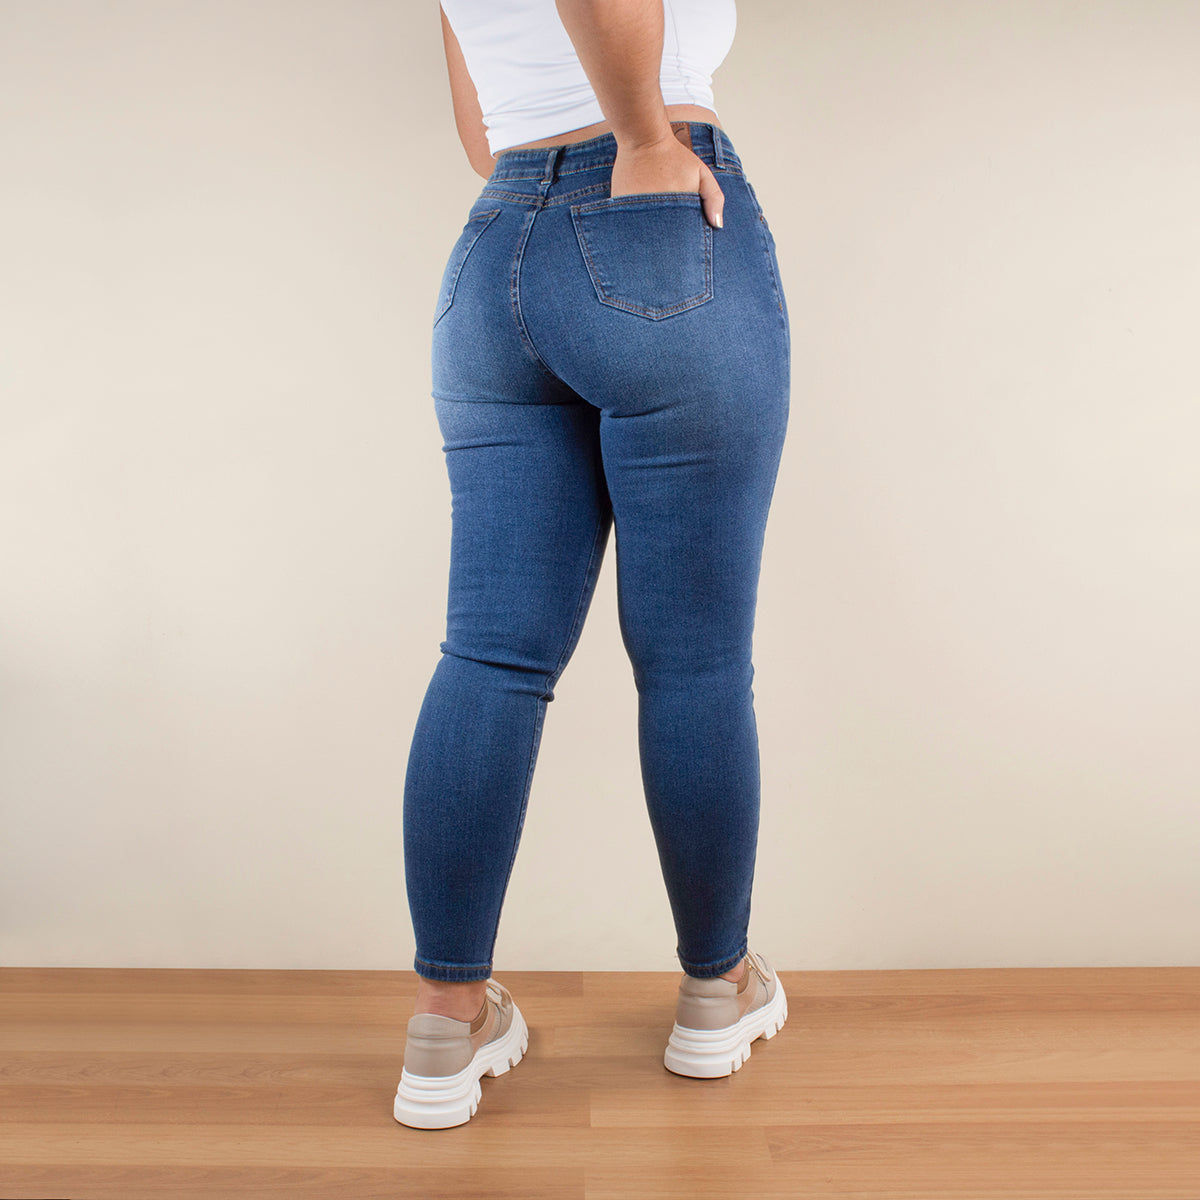 Jeans tipo skinny color azul